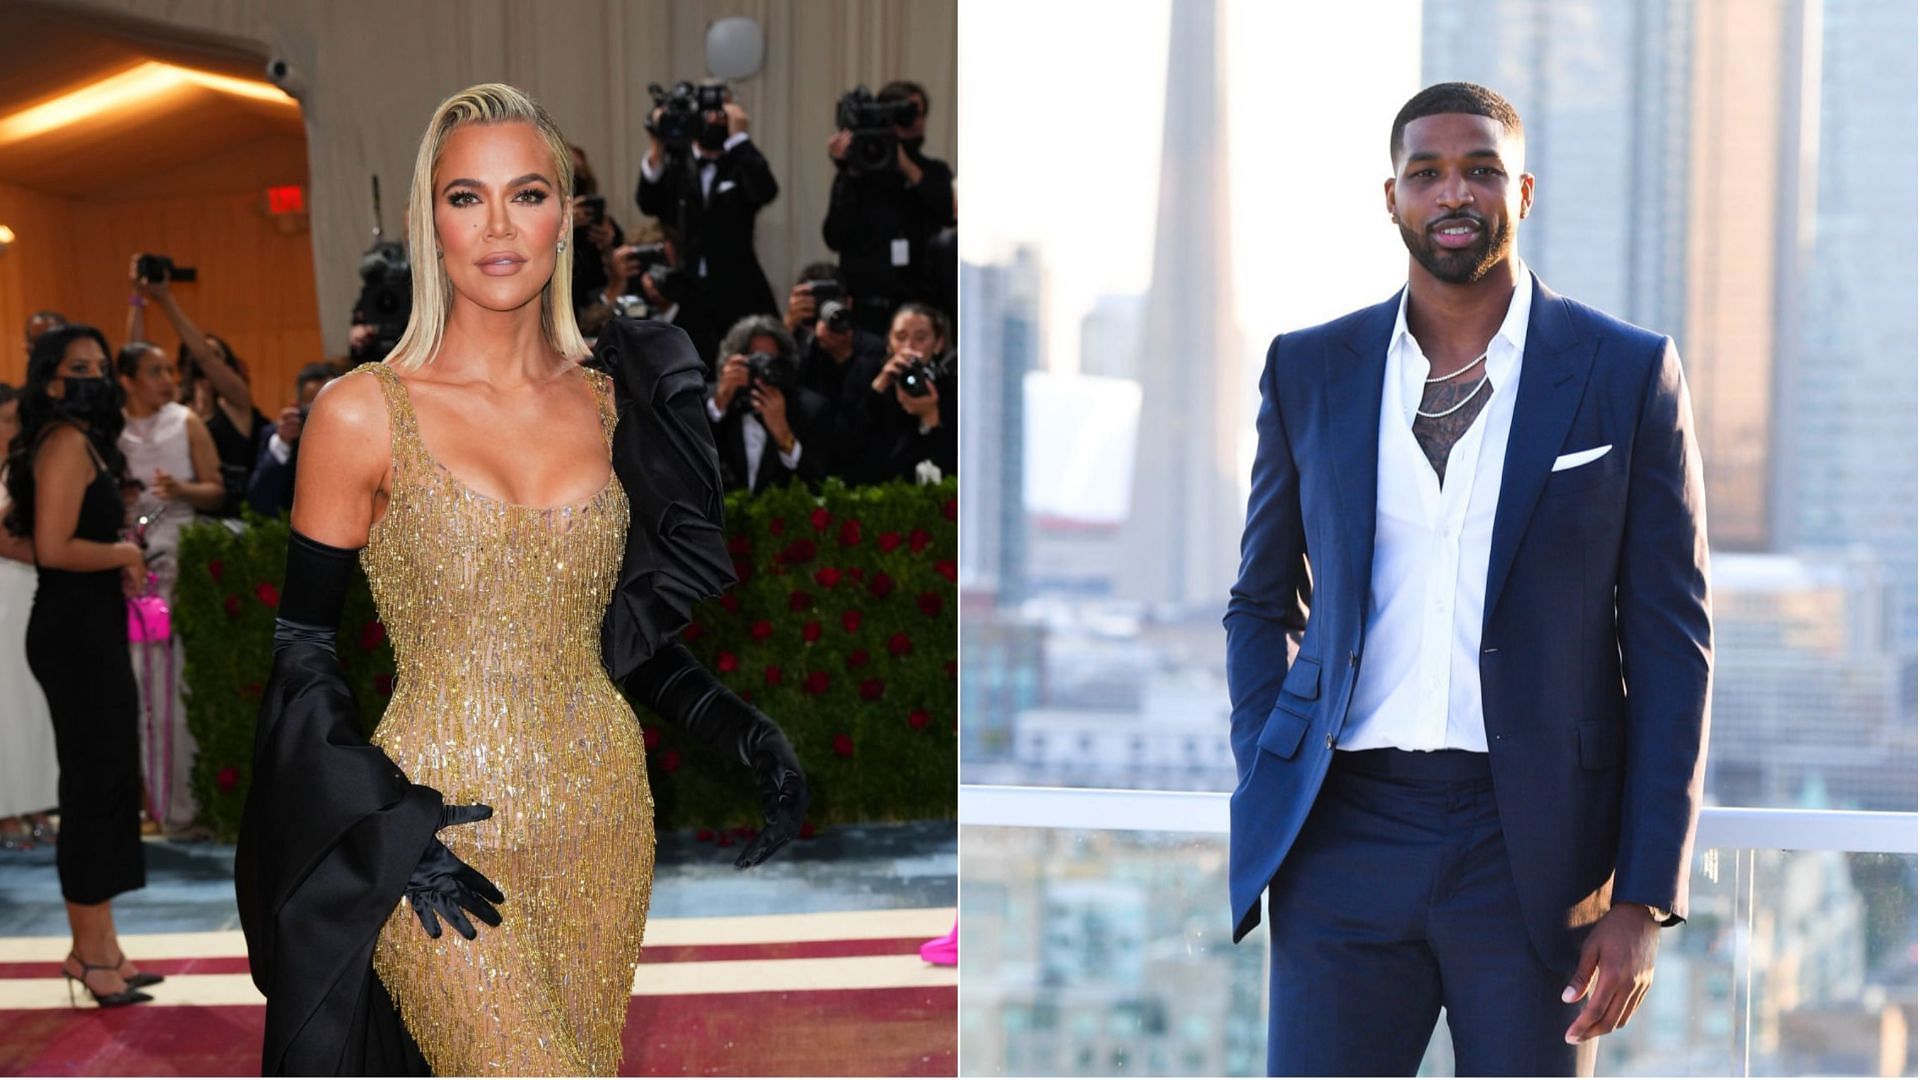 The latest episode of &#039;The Kardashians&#039; covers Khloe and her sisters finding out about Tristan Thompson&#039;s paternity scandal (Images via Getty Images/Gotham &amp; George Pimentel)